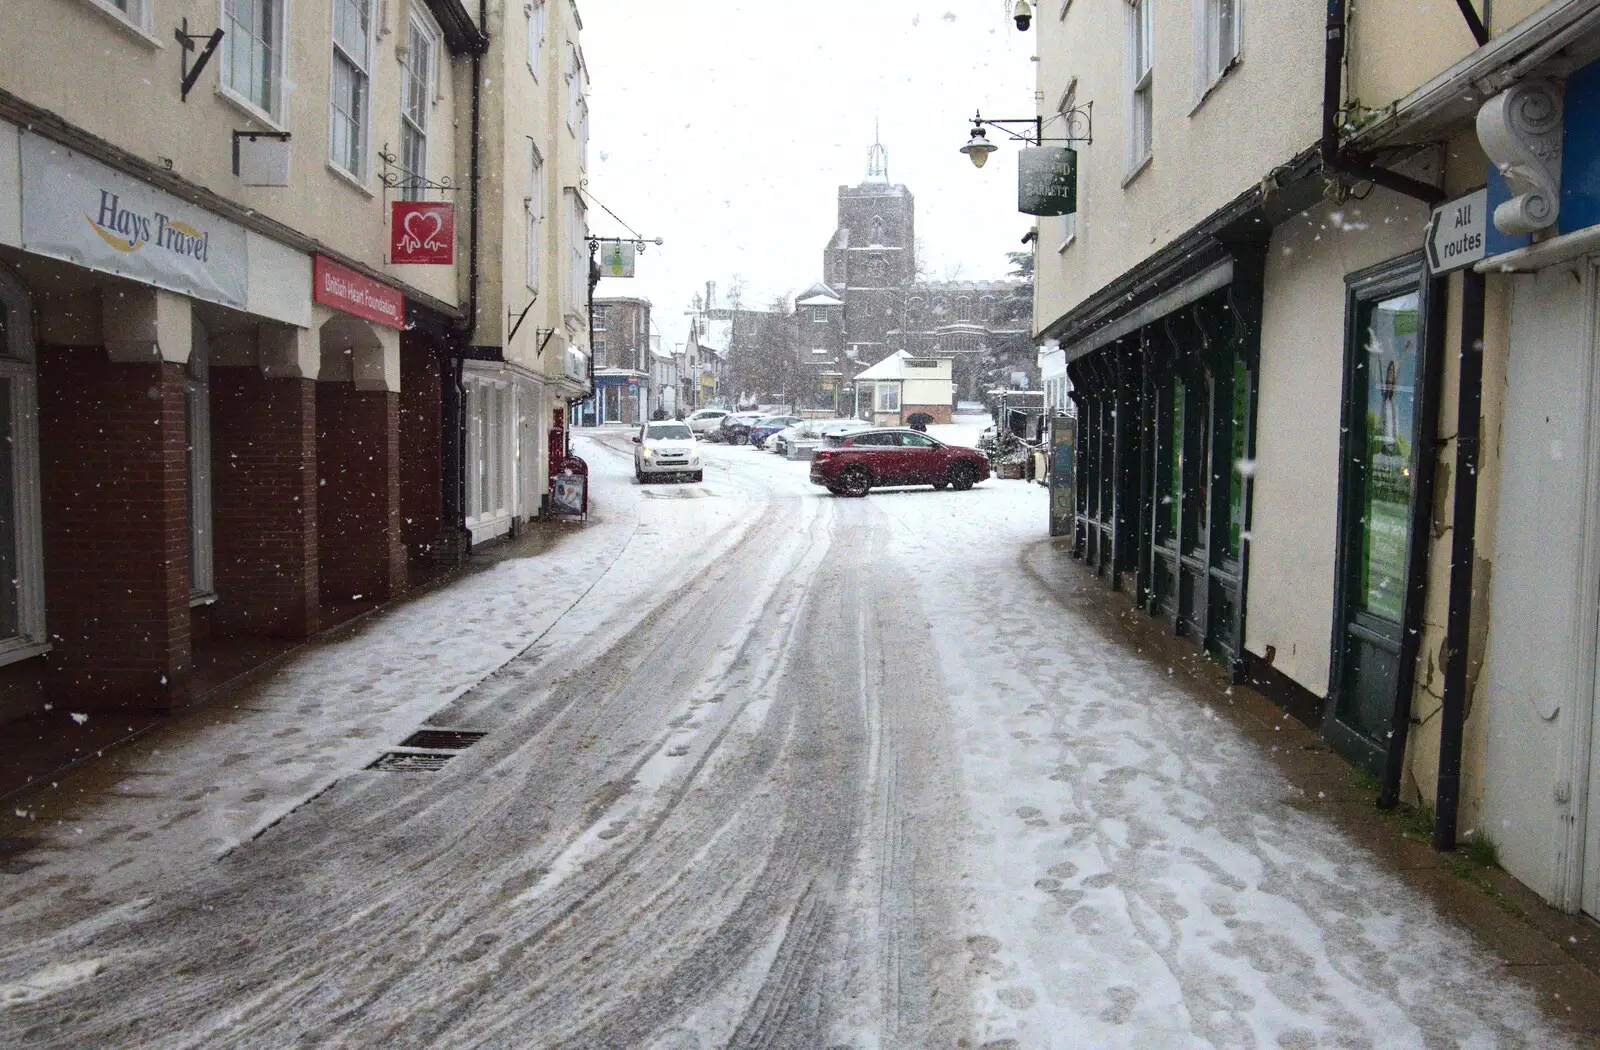 The top of Mere Street by Hays Travel, from A Snowy Morning, Diss, Norfolk - 16th January 2021